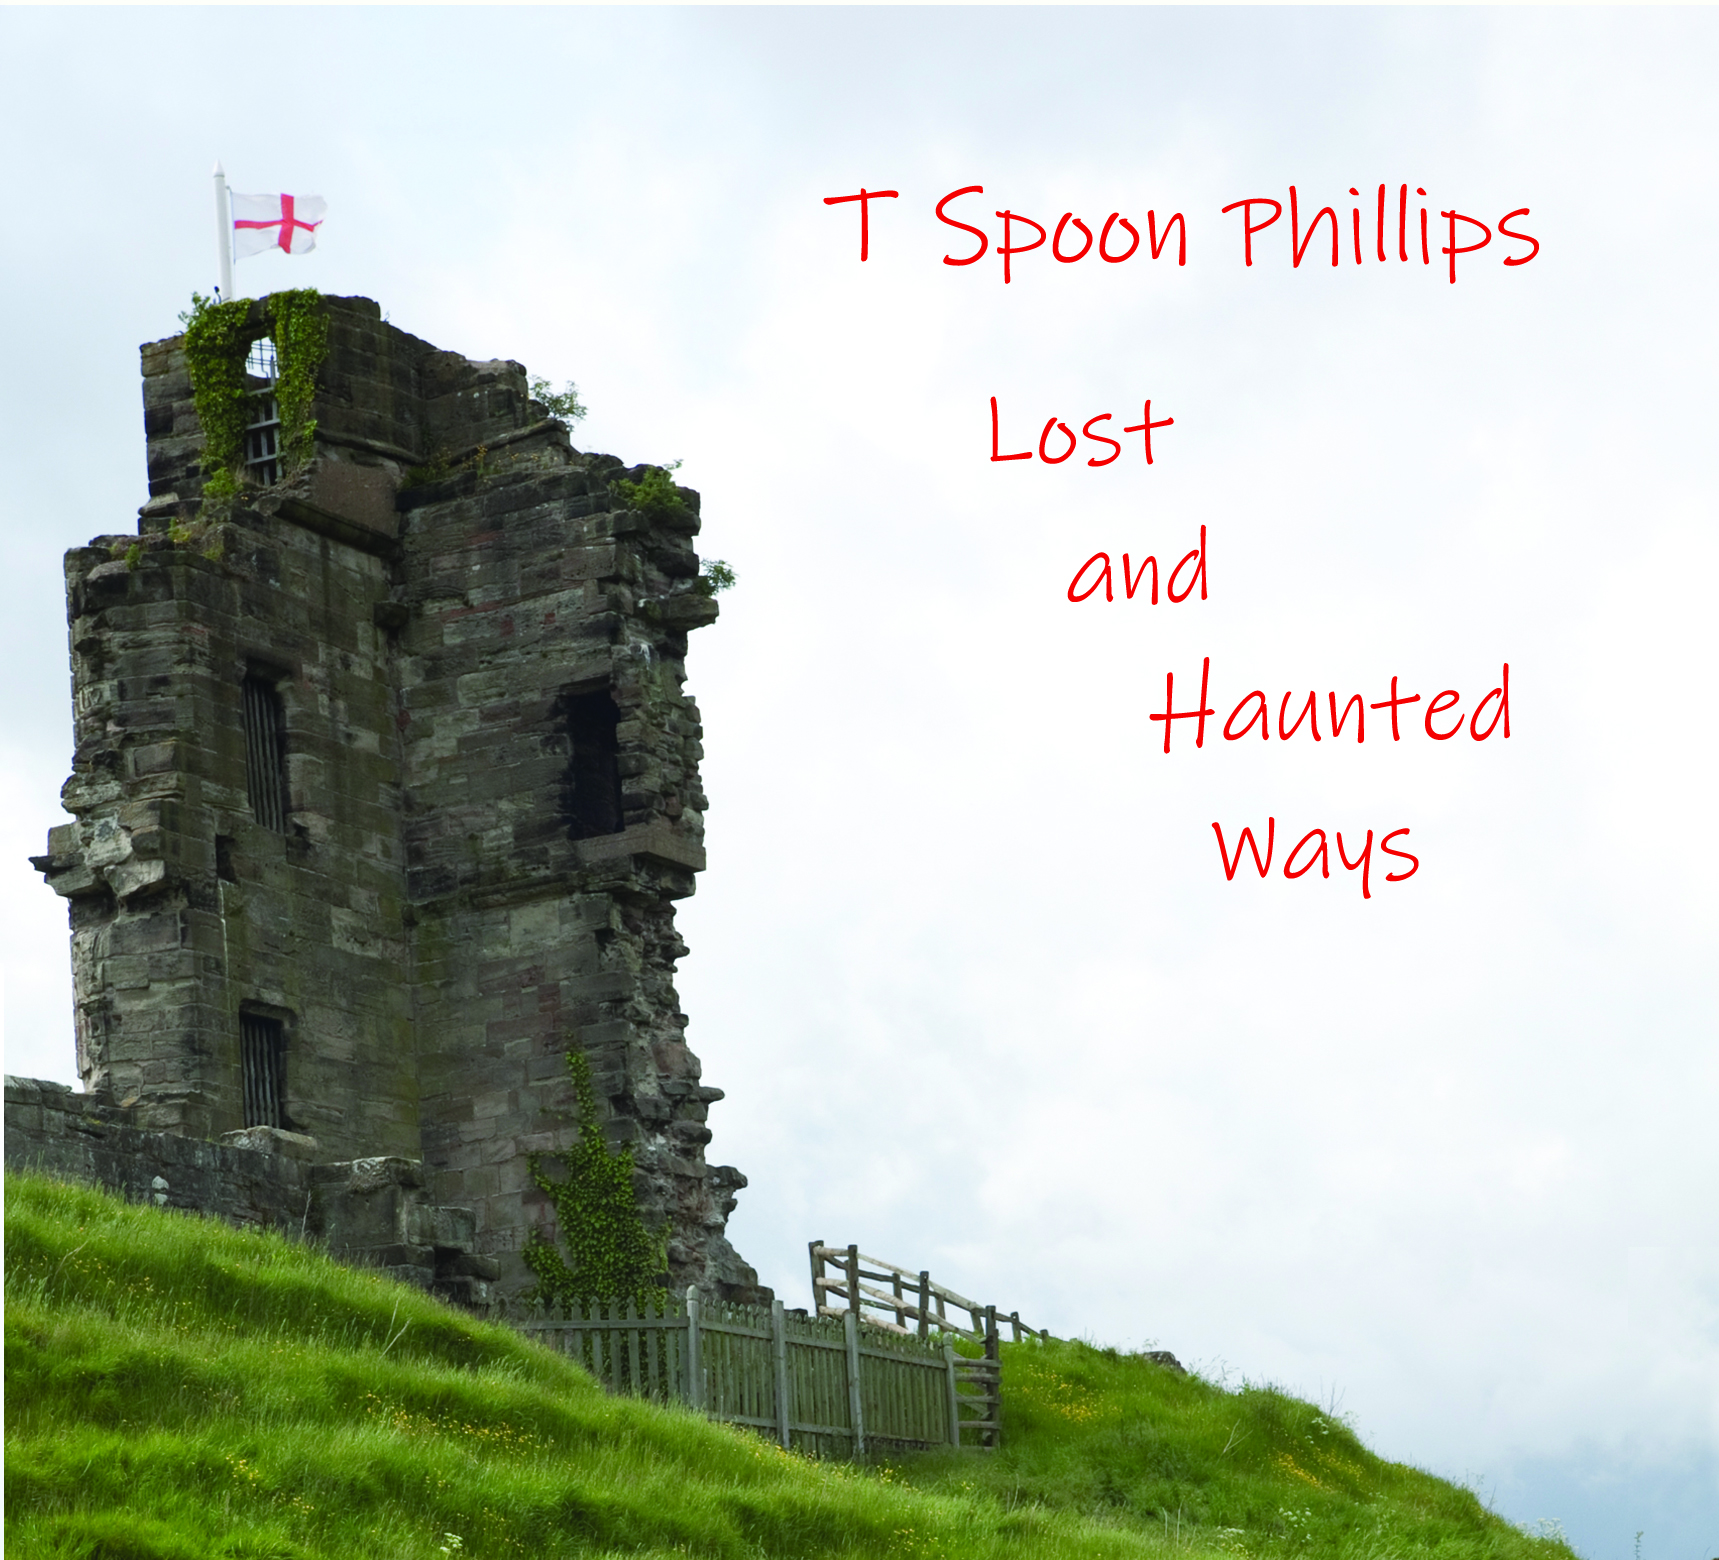 T Spoon Phillips - Album Cover Lost and Haunted Ways